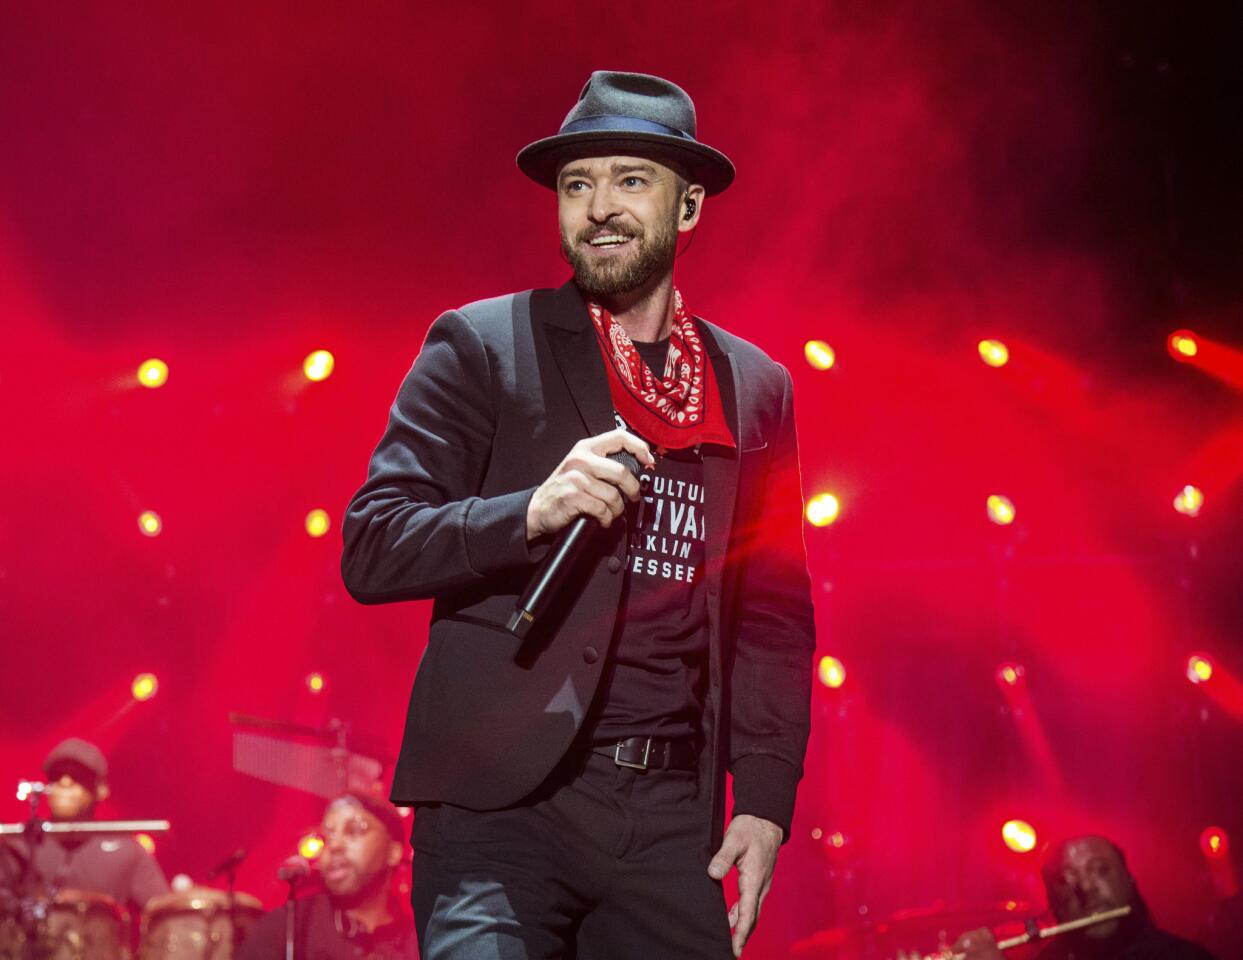 Odds Justin Timberlake's halftime show includes the song … Can’t Stop the Feeling: 1/9 SexyBack: 1/3 My Love: 1/3 Filthy: 1/1 Supplies: 3/2 Rock Your Body: 2/1 An unreleased song from his new album: 4/1 Odds Justin Timberlake's halftime show includes ... One full Prince Song: 3/2 Two full Prince Songs: 50/1 A medley of Prince Songs: 9/2 No Prince Songs: 4/1